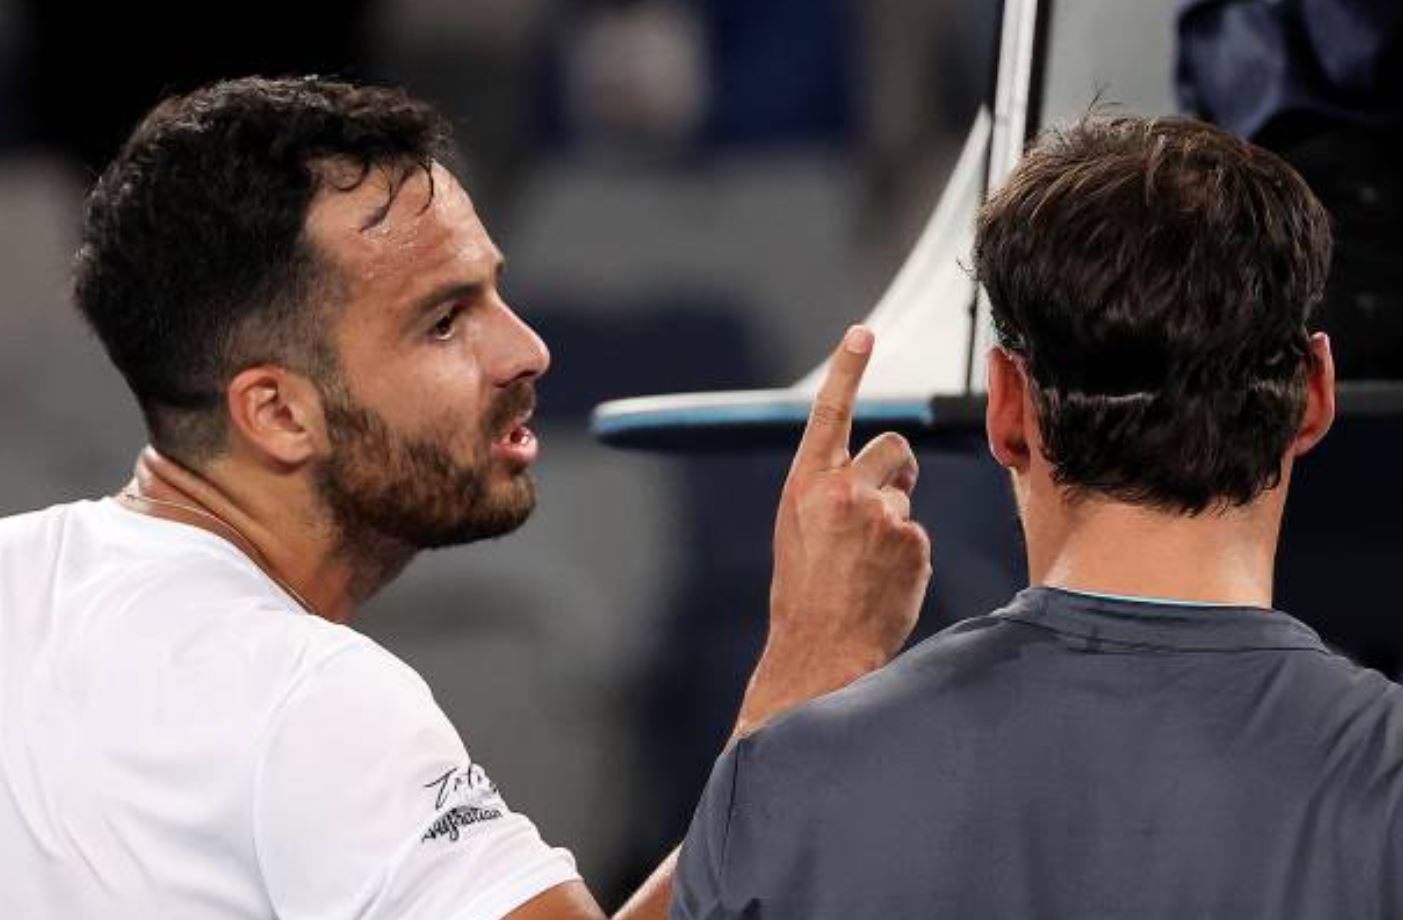 Watch: Fognini and Caruso Nearly Come to Blows after Dramatic Finish  